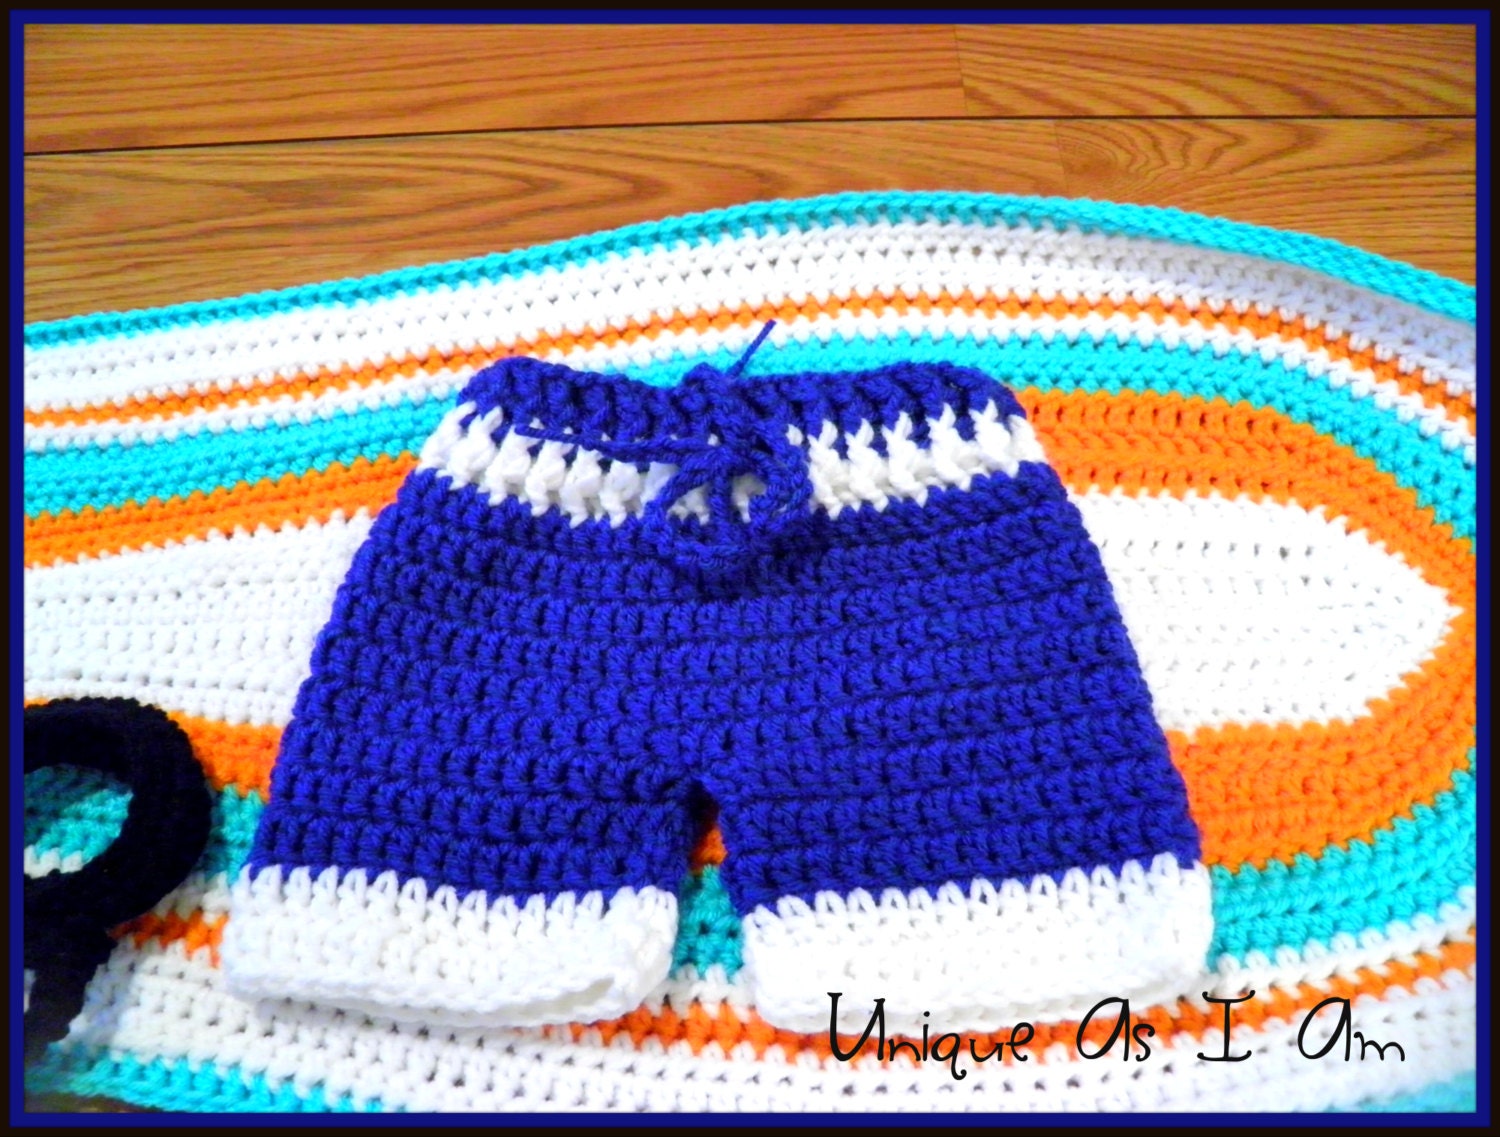 Crochet Surf's Up Baby Boy Swim Trunks and by UniqueAsIAm on Etsy